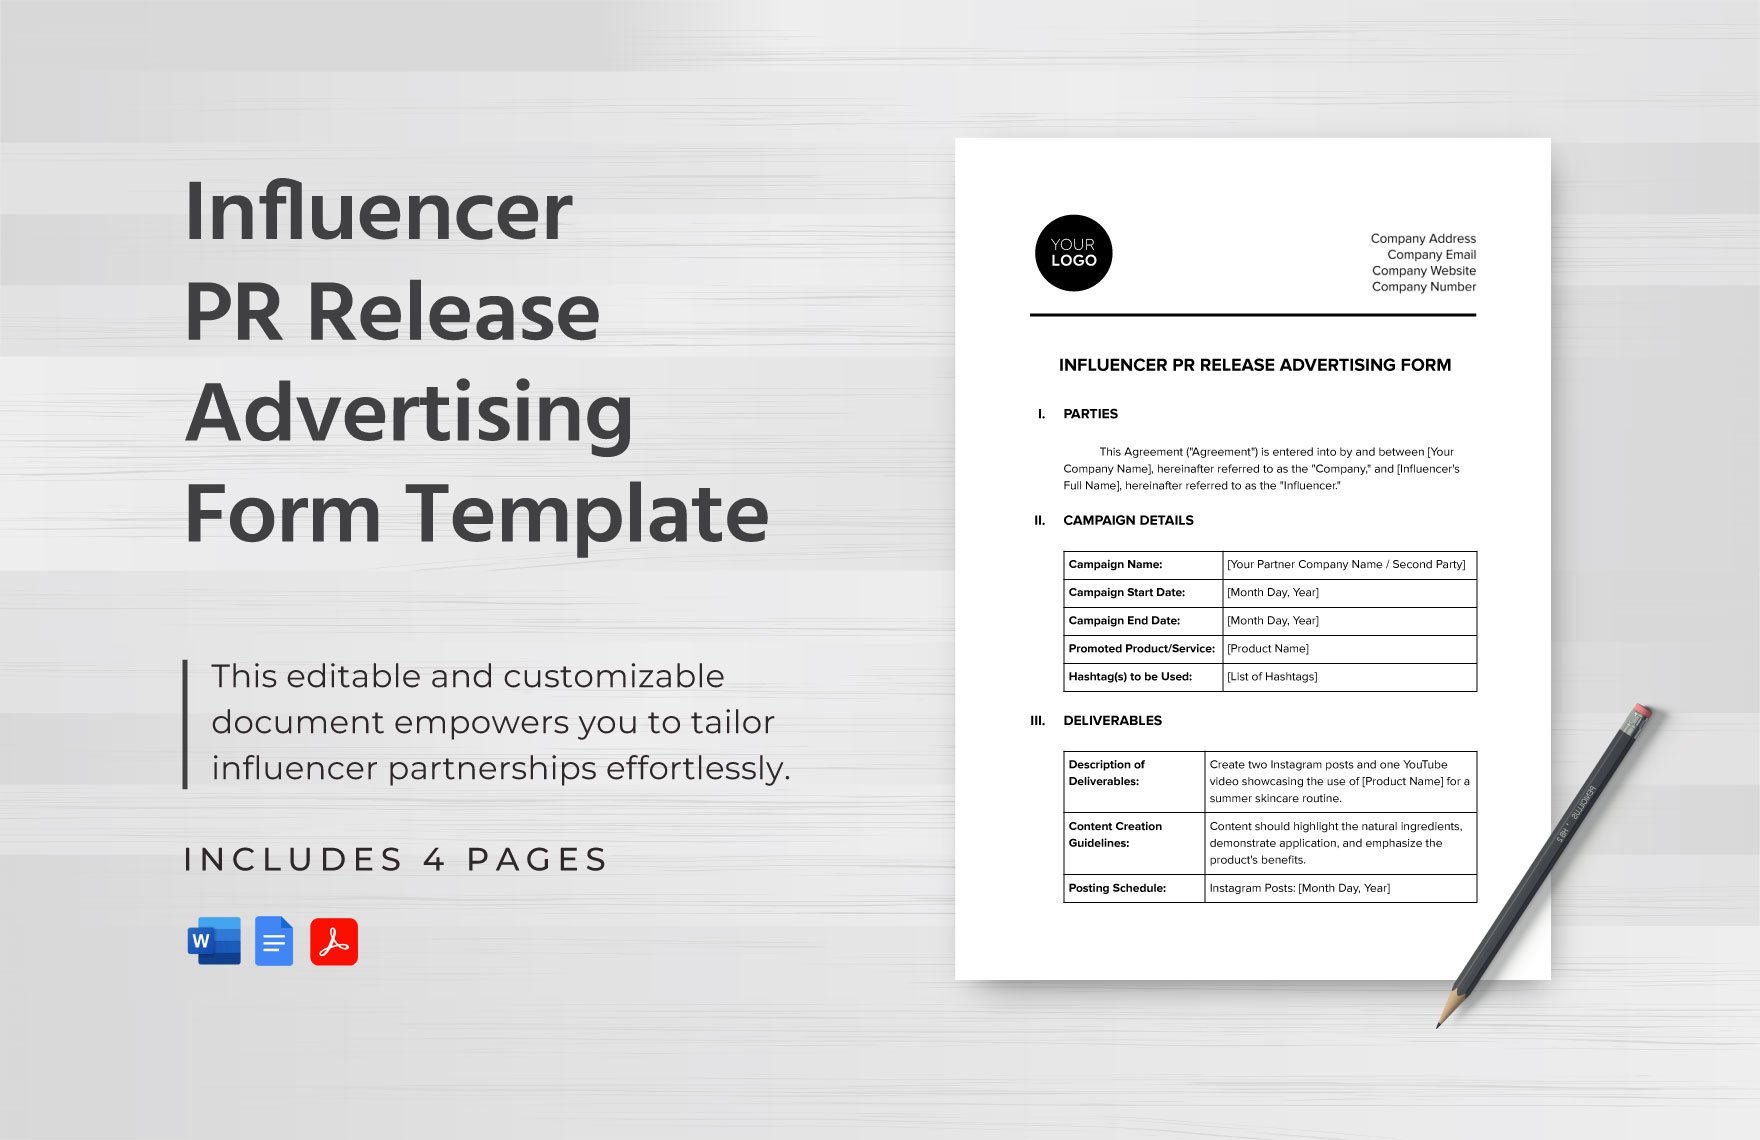 Influencer PR Release Advertising Form Template